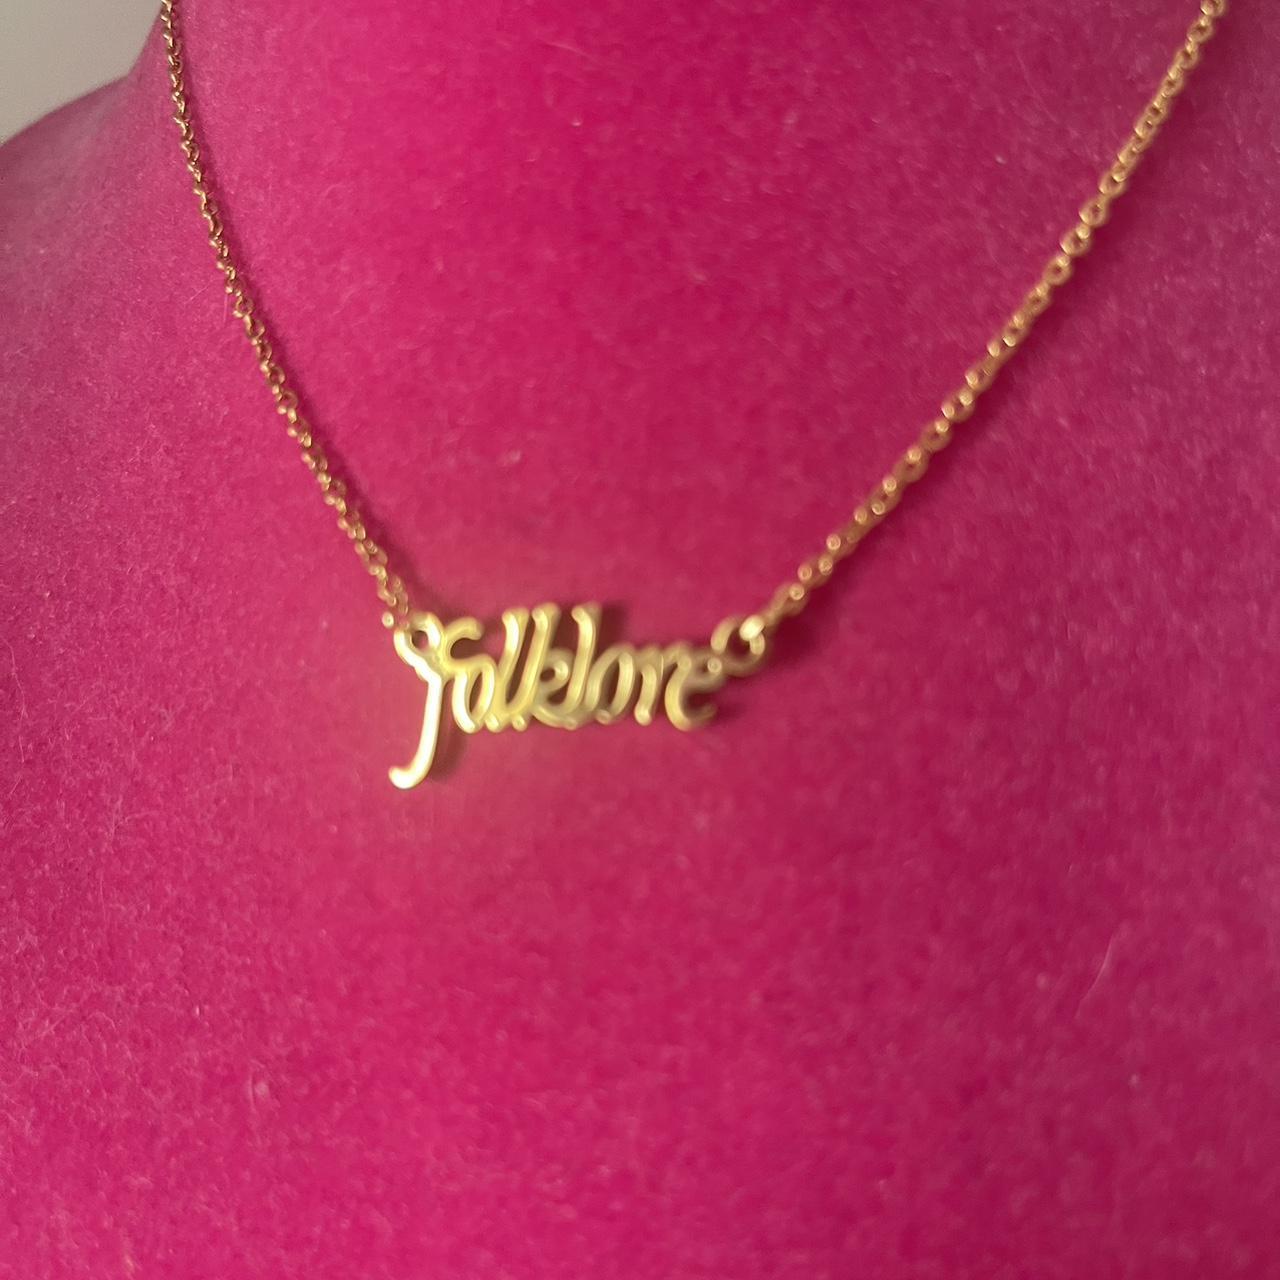 folklore taylor swift necklace